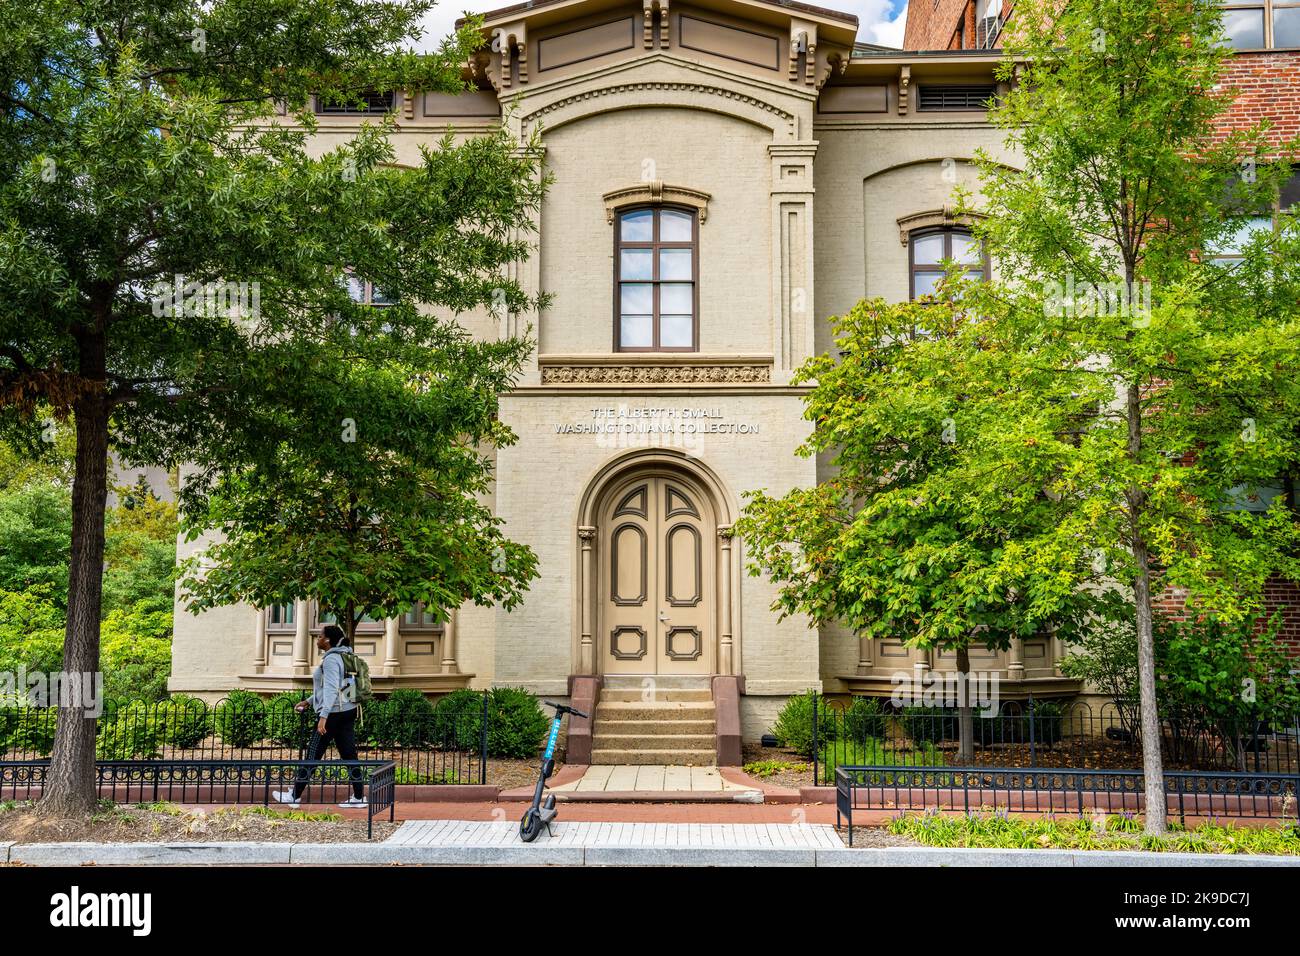 Washington, DC - Sept. 8, 2022: The historic Woodhull House contains the Albert H. Small Washingtonia Collection of objects documenting the history of Stock Photo